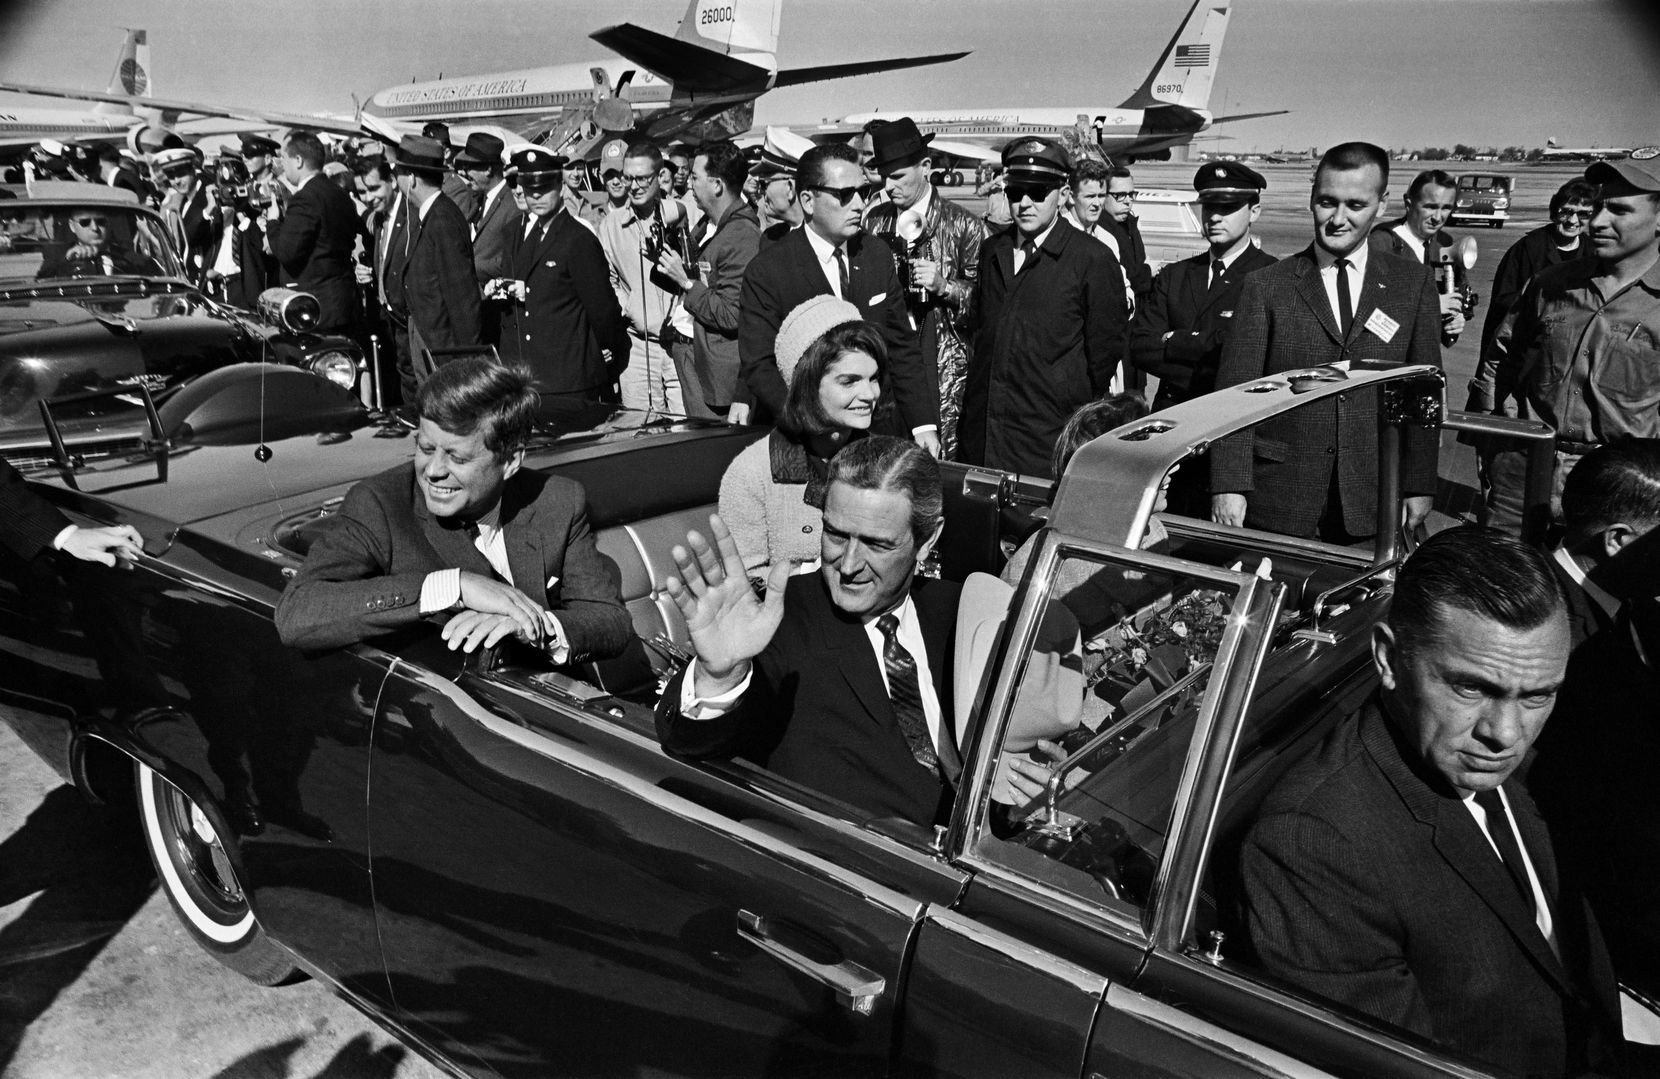 JFK Facts - The car JFK was assassinated in was cleaned and repurposed back into rotation and served as the presidential limo for Johnson, Nixon, Ford and Carter before being retired in 1977.-u/Gaymface